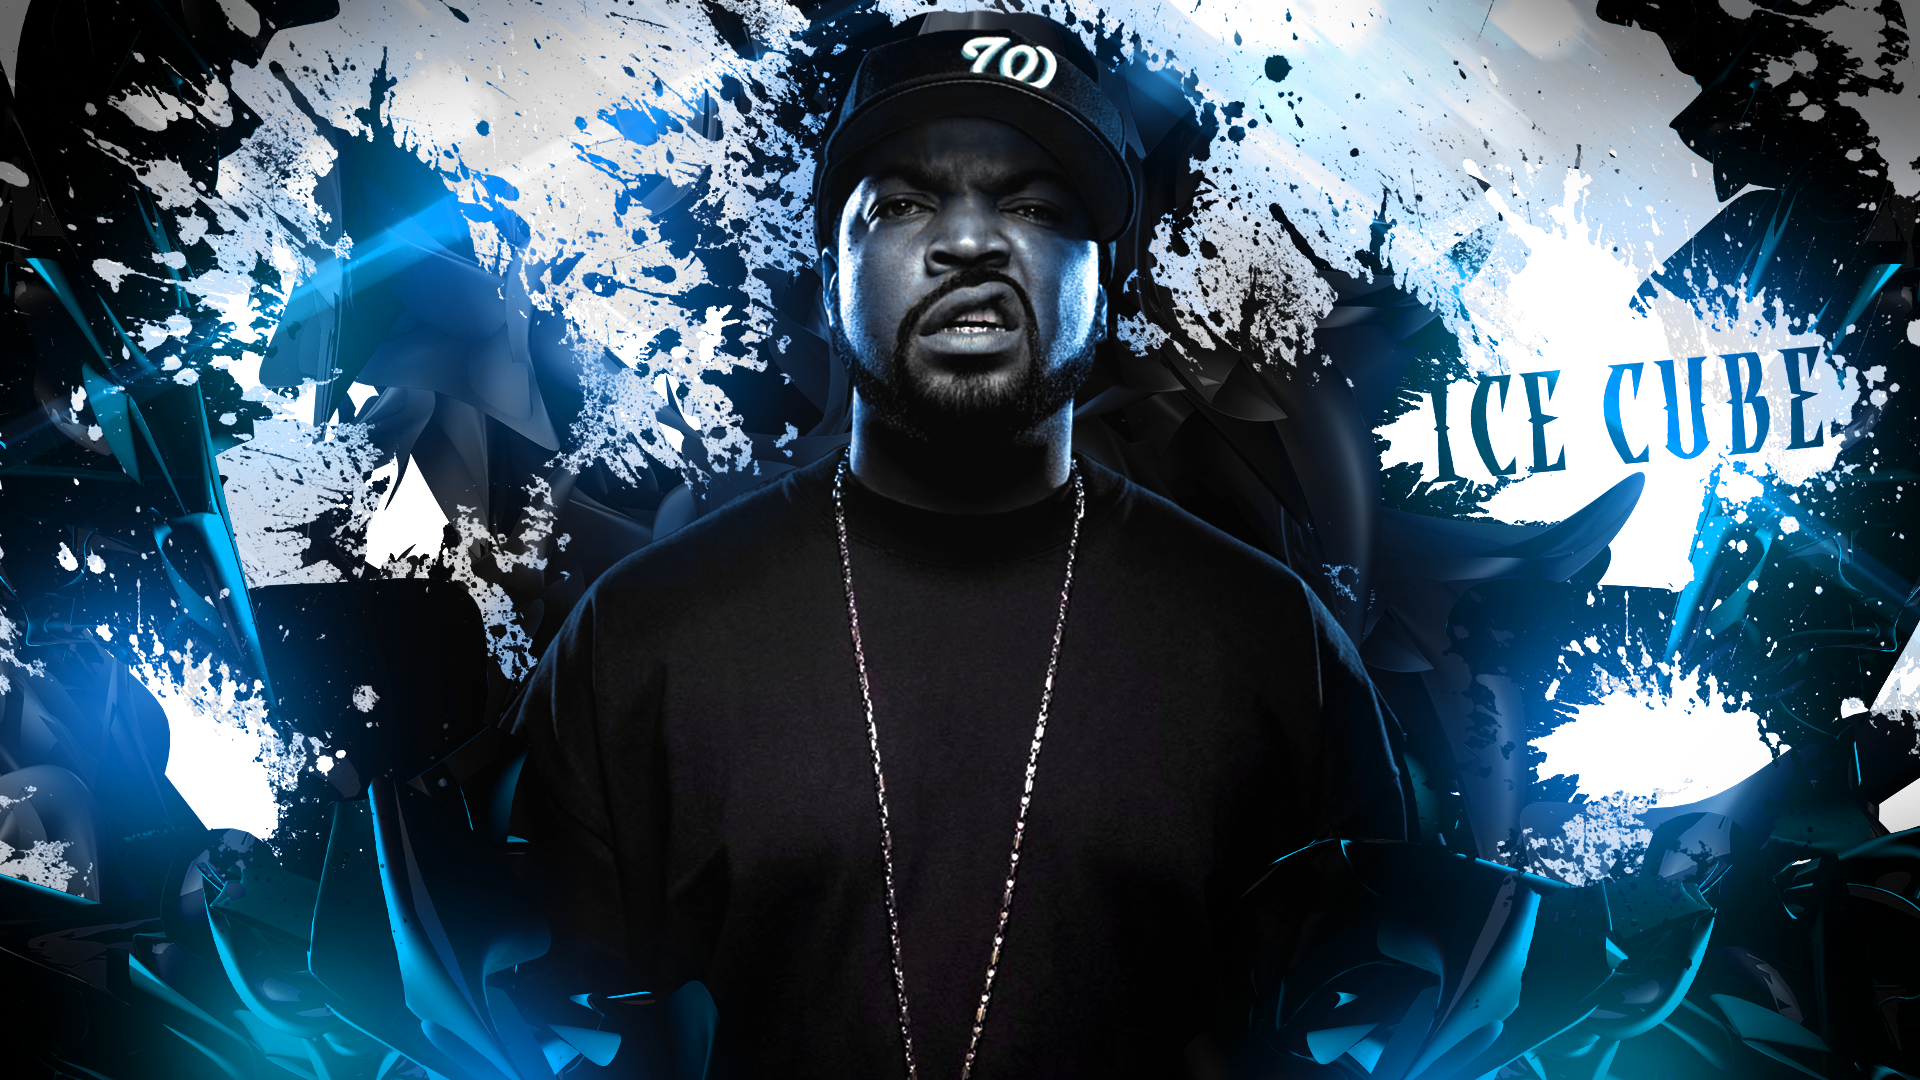 Ice Cube Desktop Background   Wallpaper High Definition High Quality 1920x1080